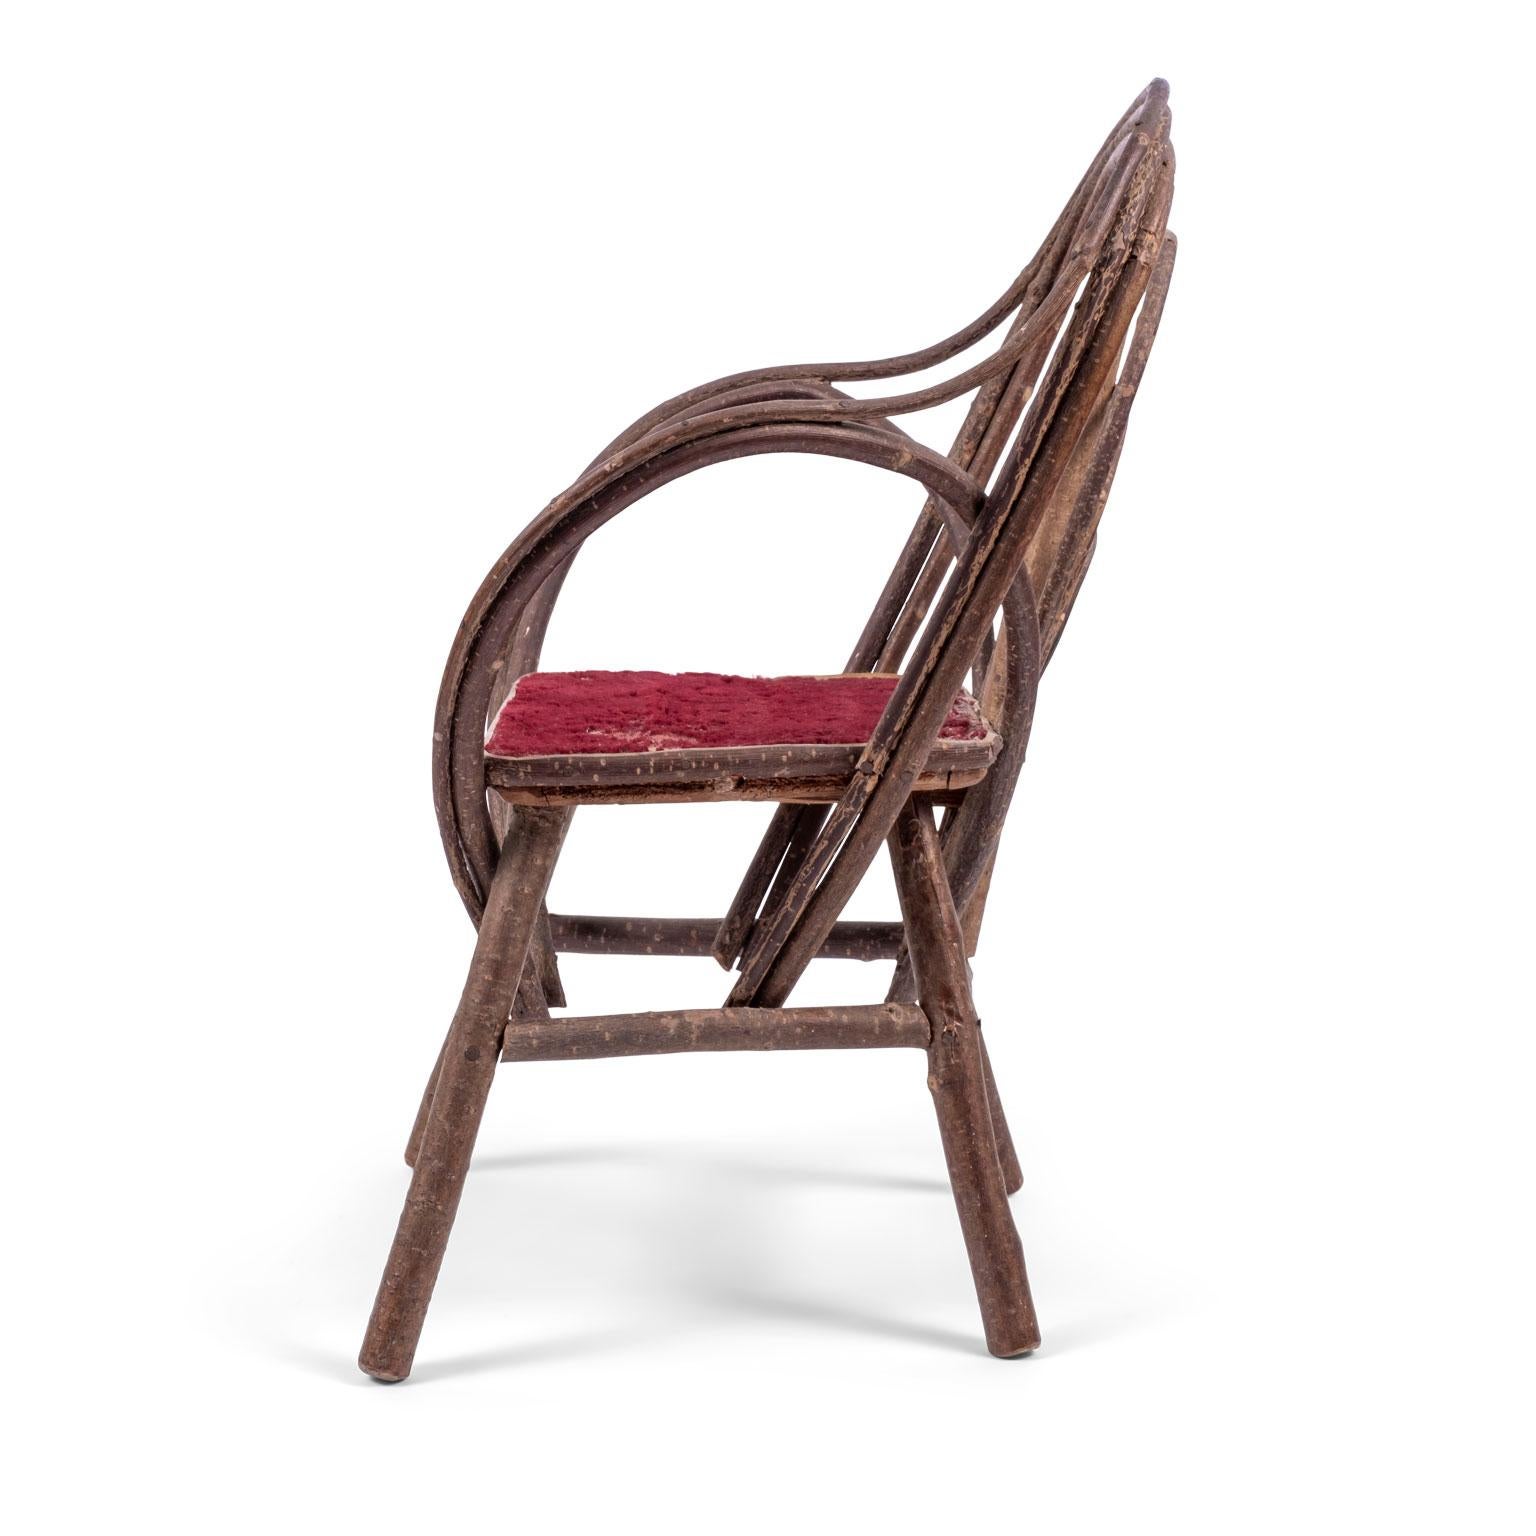 Vintage petite bent-willow chair, circa 1910s-1930s. Small Folk Art chair made from bent willow featuring original red velvet upholstered seat (seat can be reupholstered for a nominal cost). Perfect size for a small child, large doll or as a